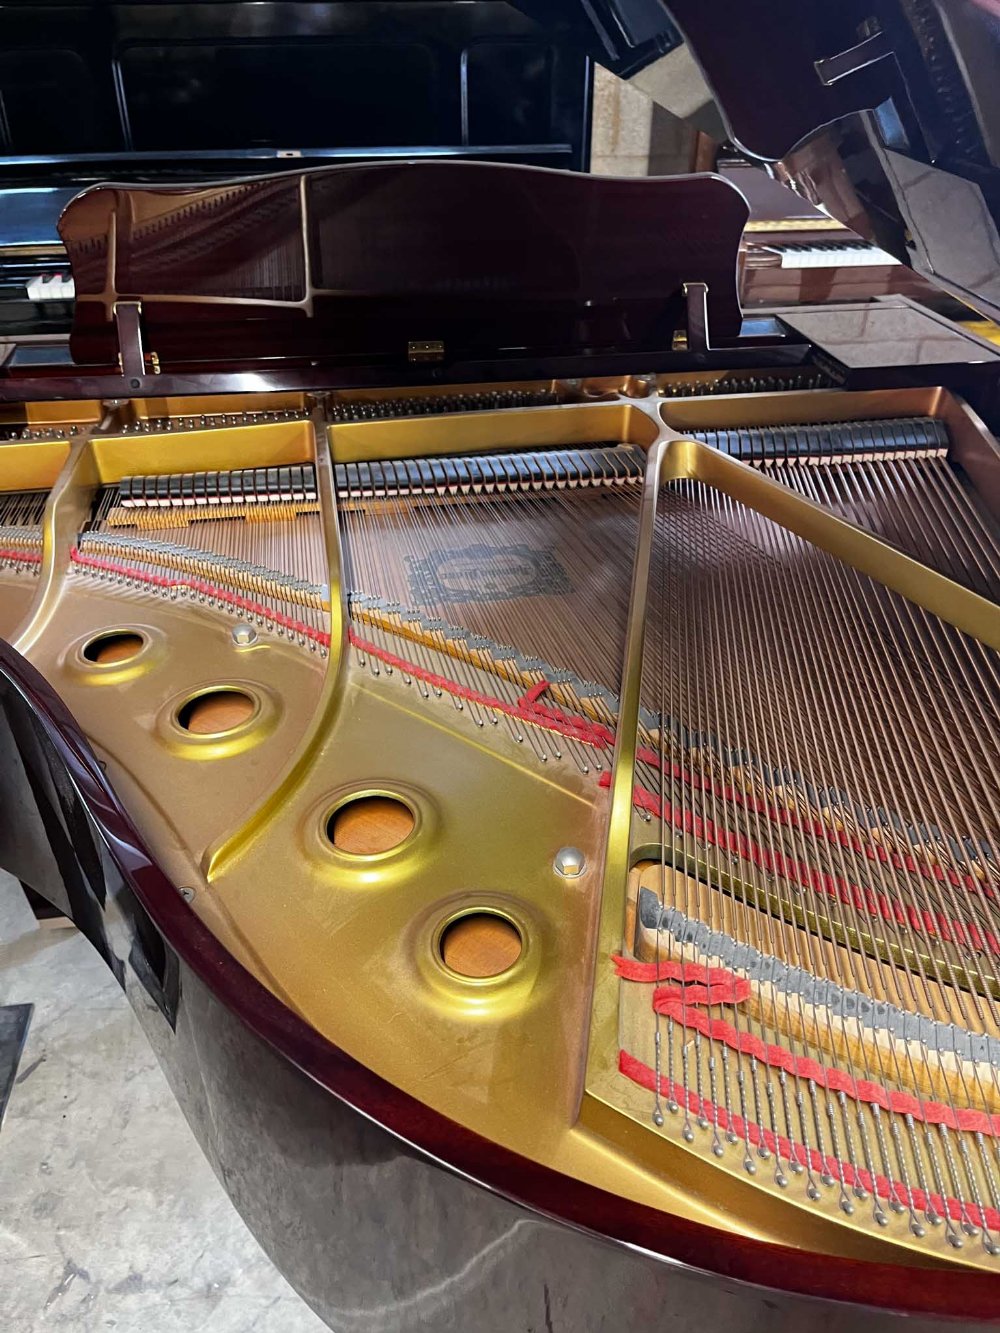 Yamaha (c2006) A 5ft Model GB1 grand piano in a bright mahogany case on square tapered legs. - Image 7 of 7